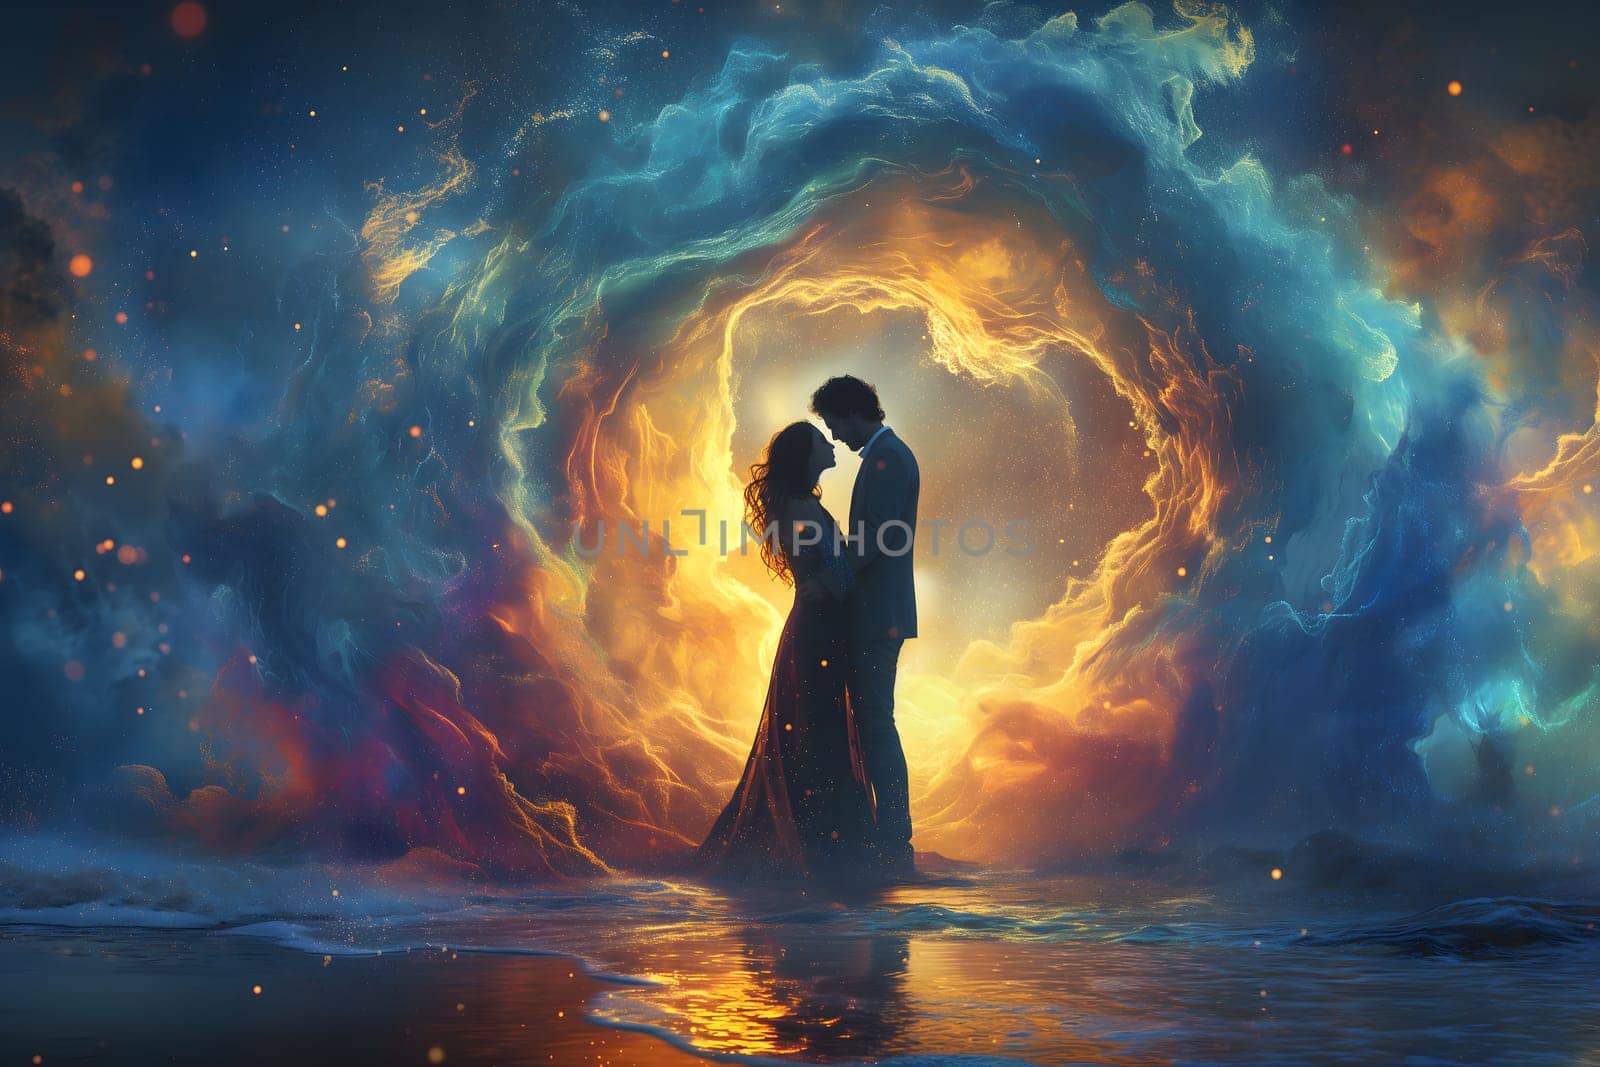 Man and woman embracing in surreal, colorful liquid fantasy dreamscape. Neural network generated image. Not based on any actual person or scene.